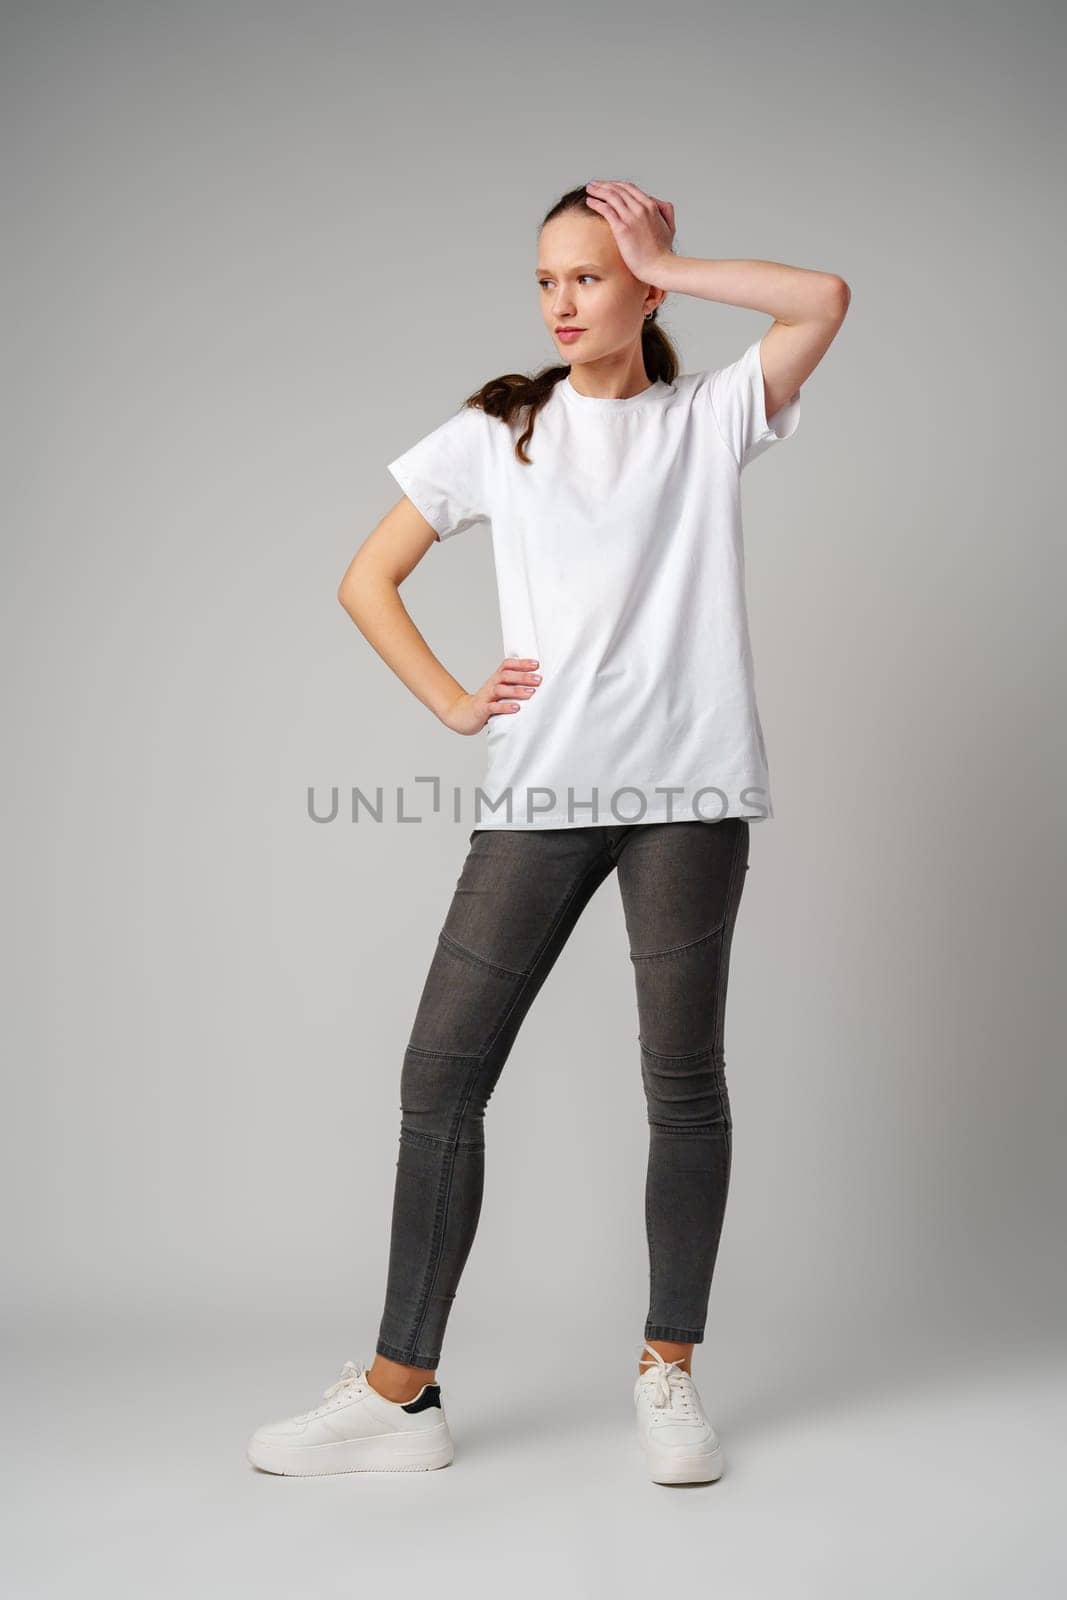 Beautiful young girl posing in white T-shirt and jeans on gray background in studio